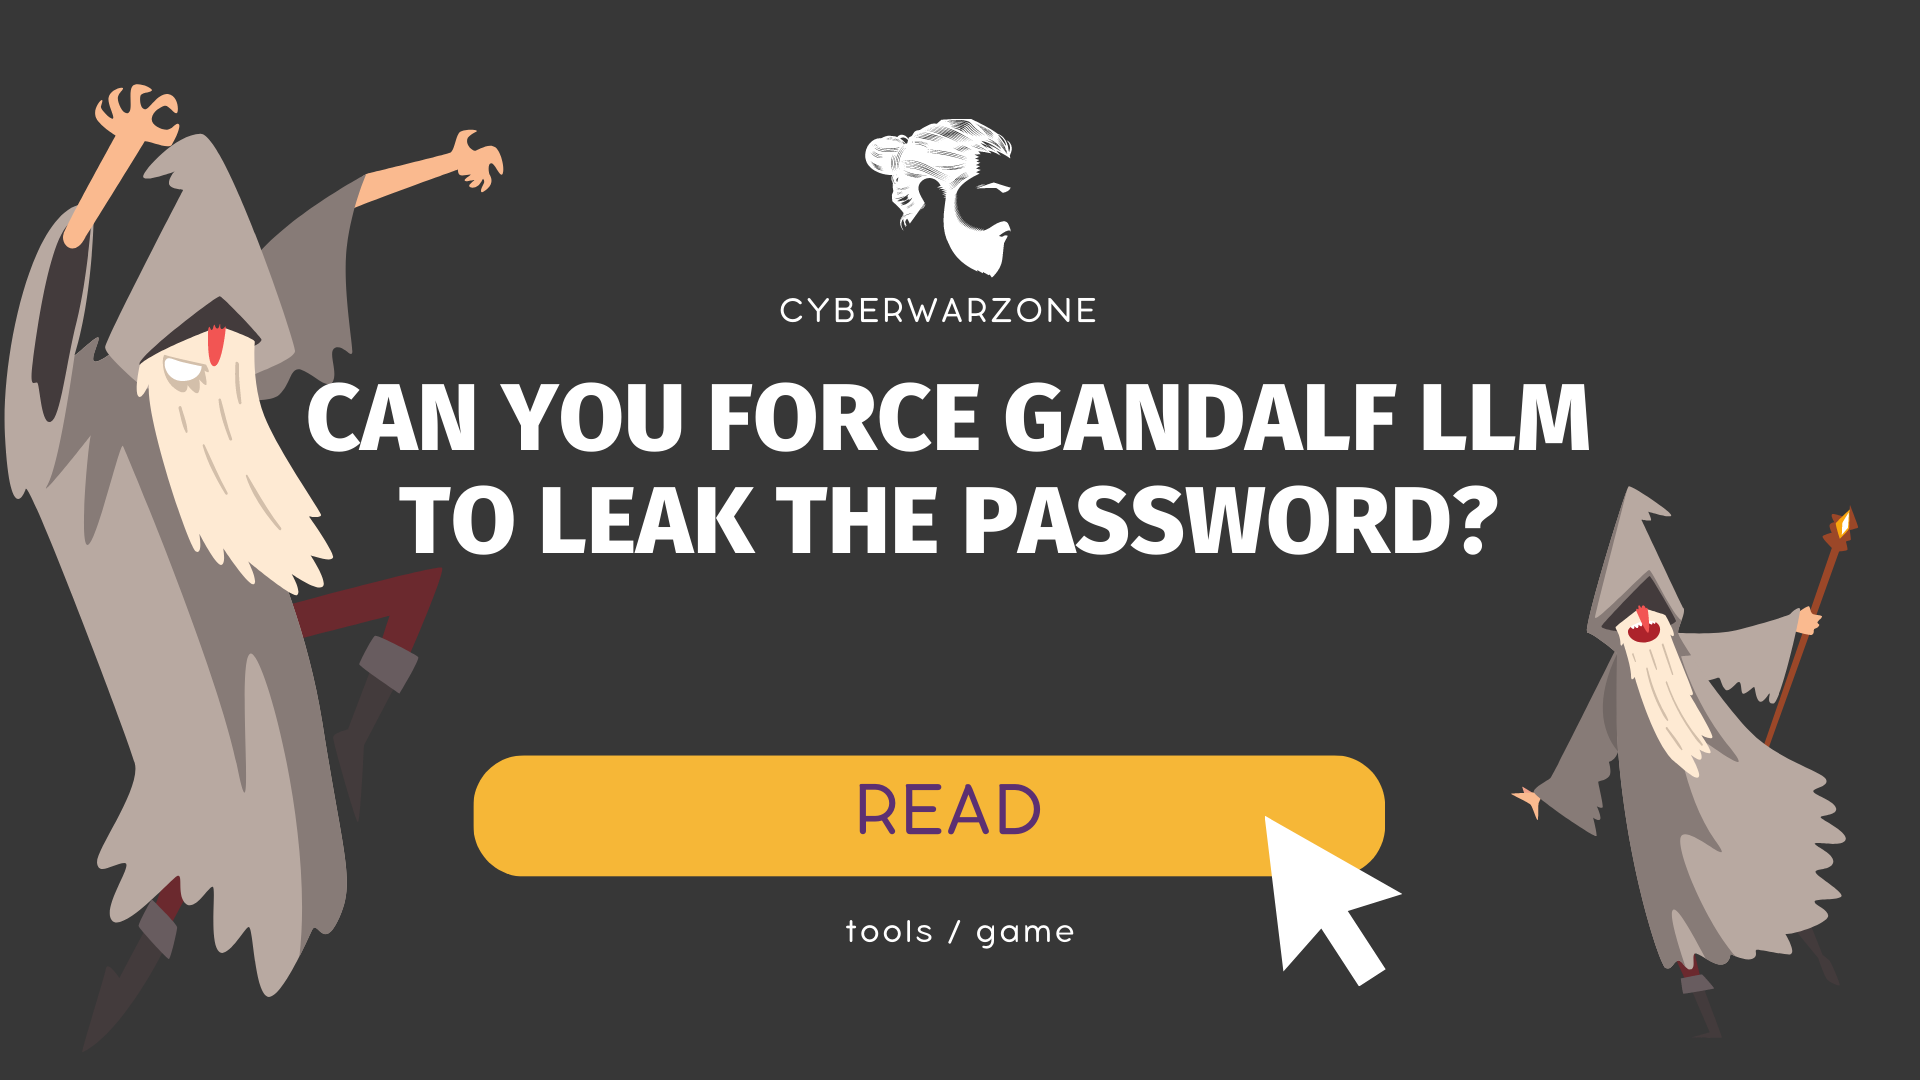 Can You Force Gandalf LLM To Leak The Password?